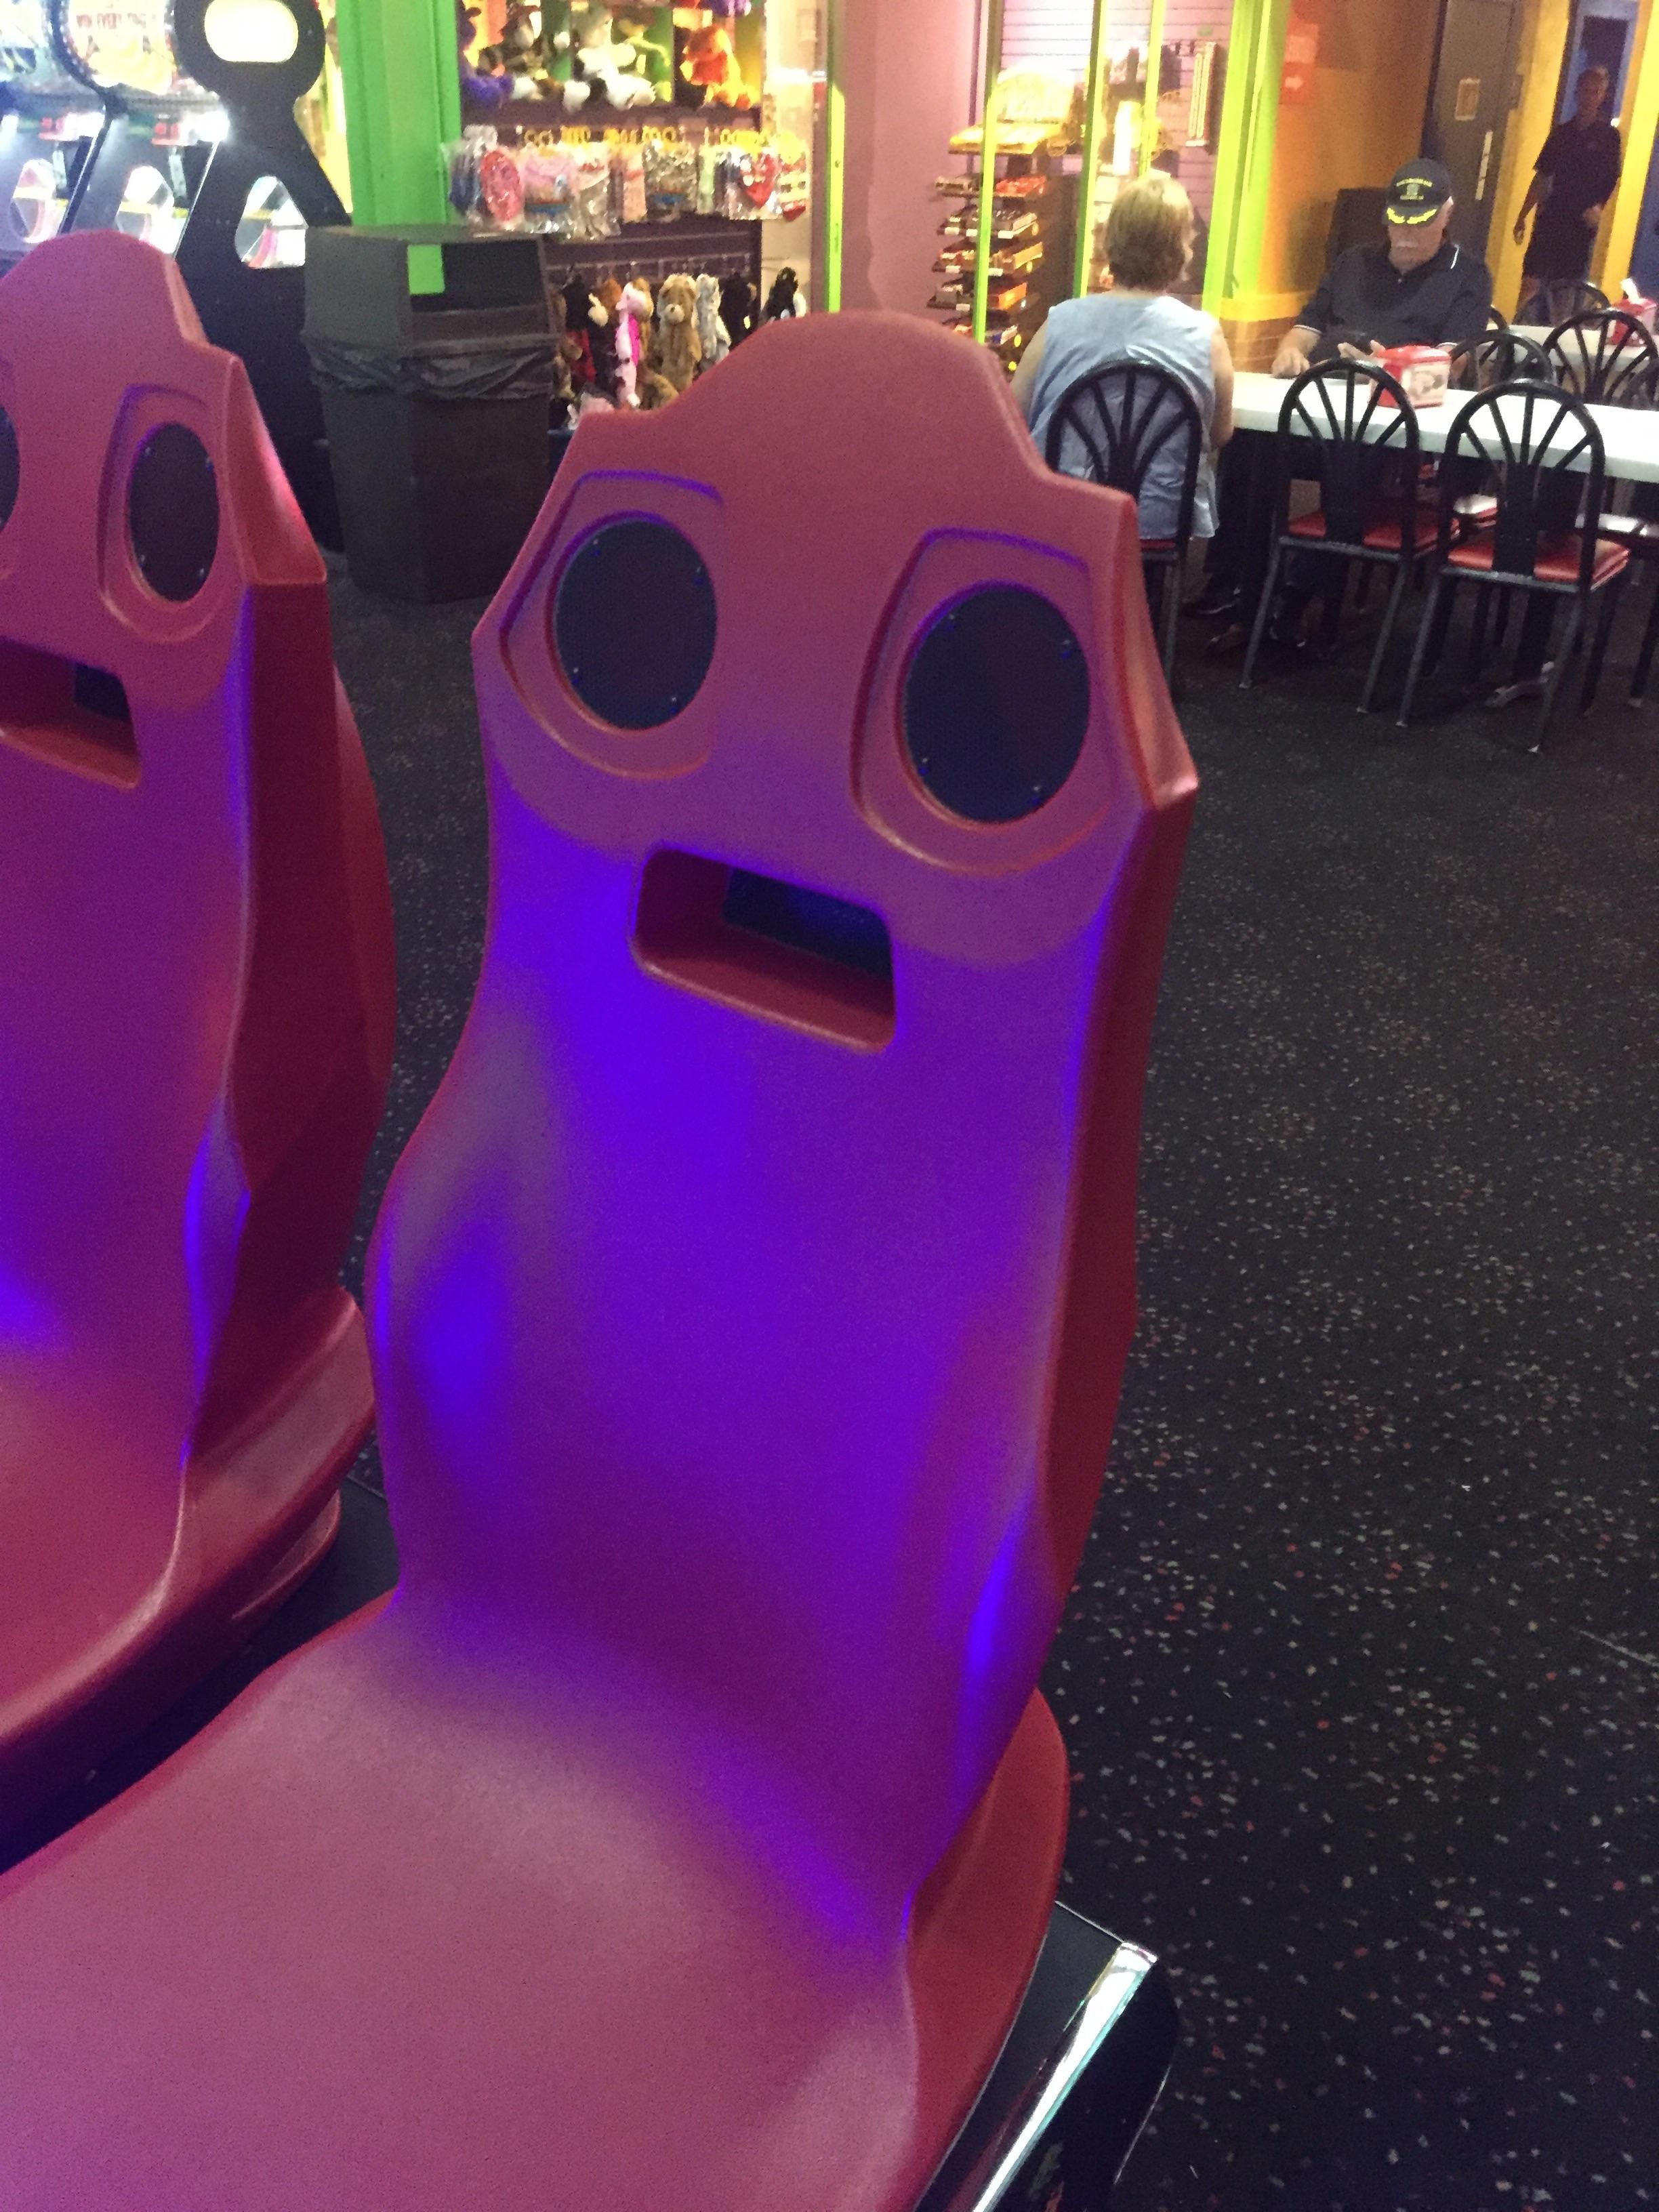 These arcade game seats have seen things